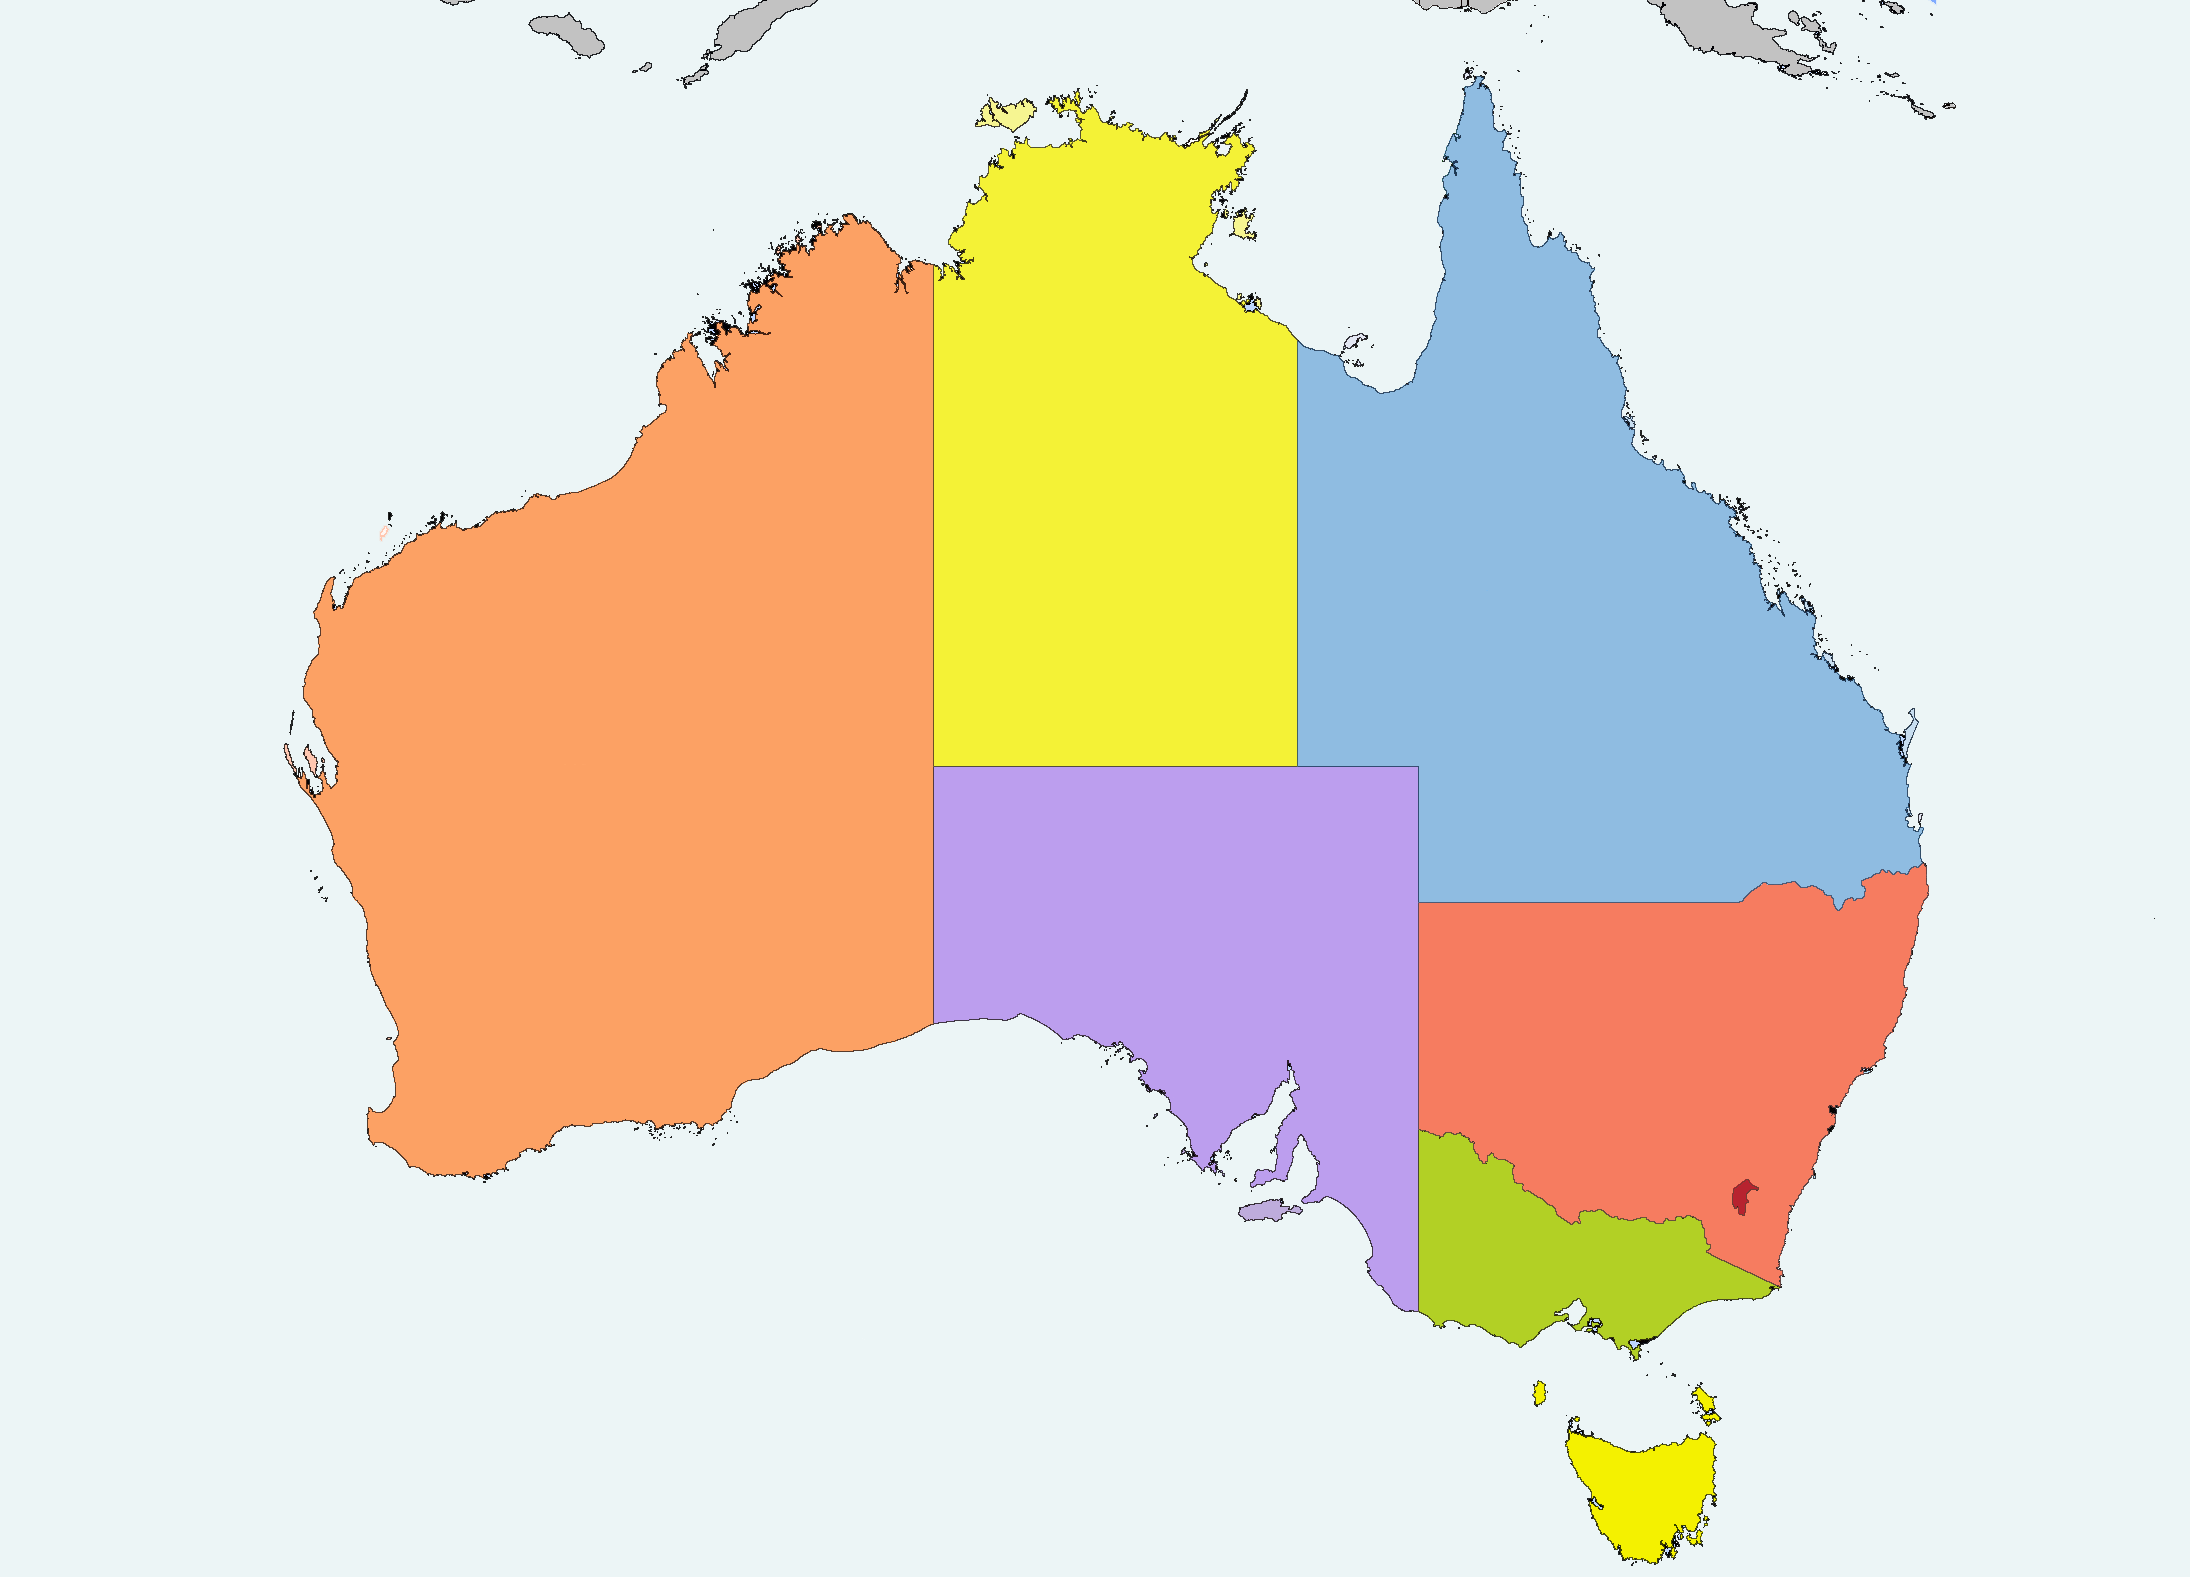 Australia_location_map_recolored.png